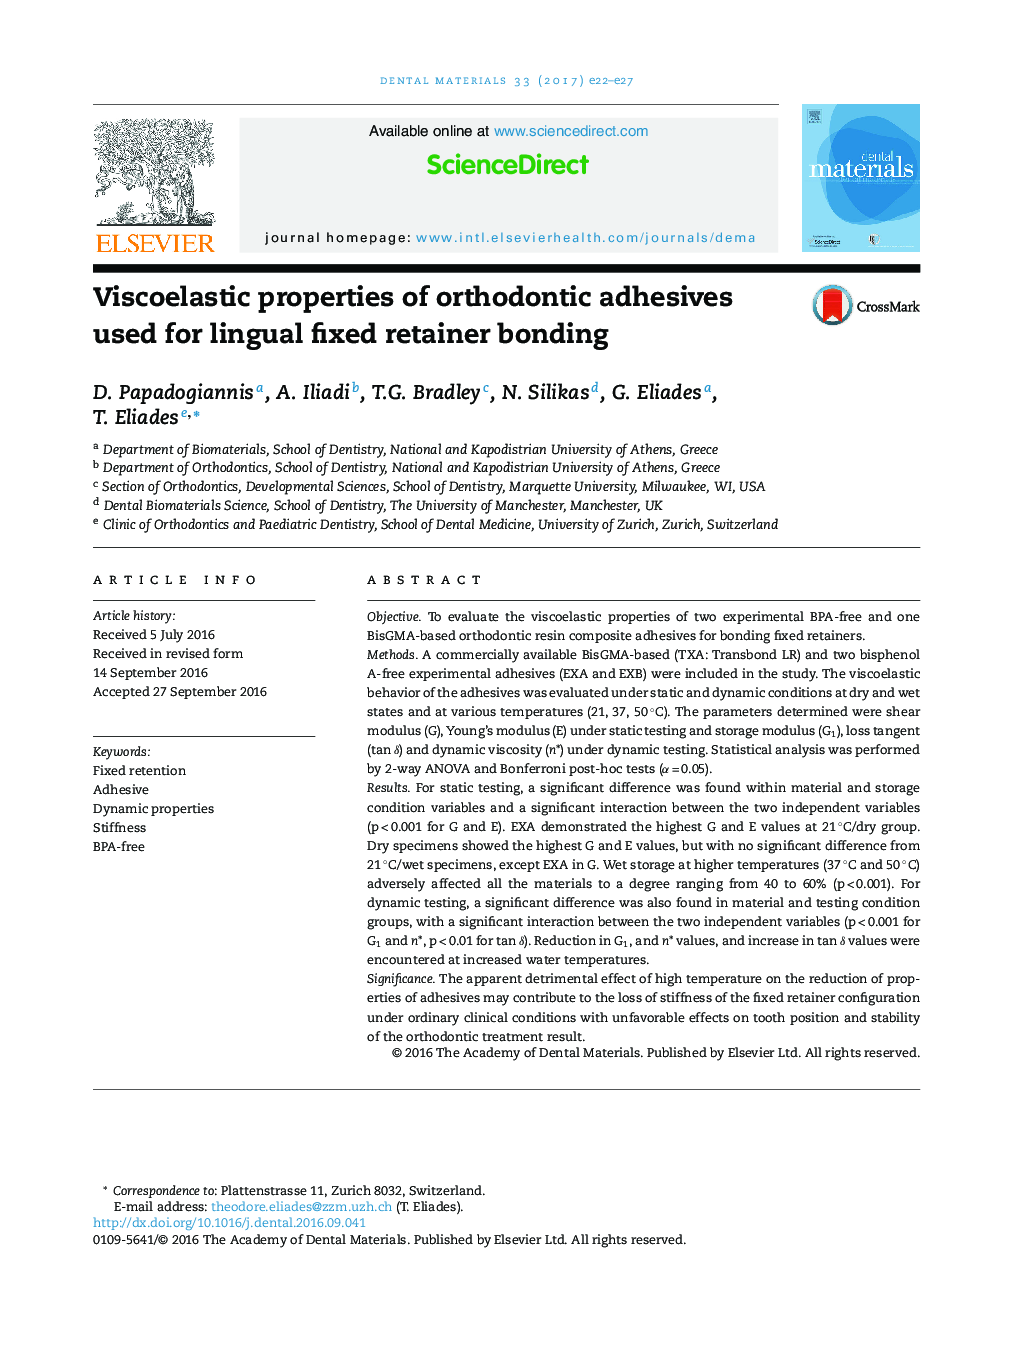 Viscoelastic properties of orthodontic adhesives used for lingual fixed retainer bonding